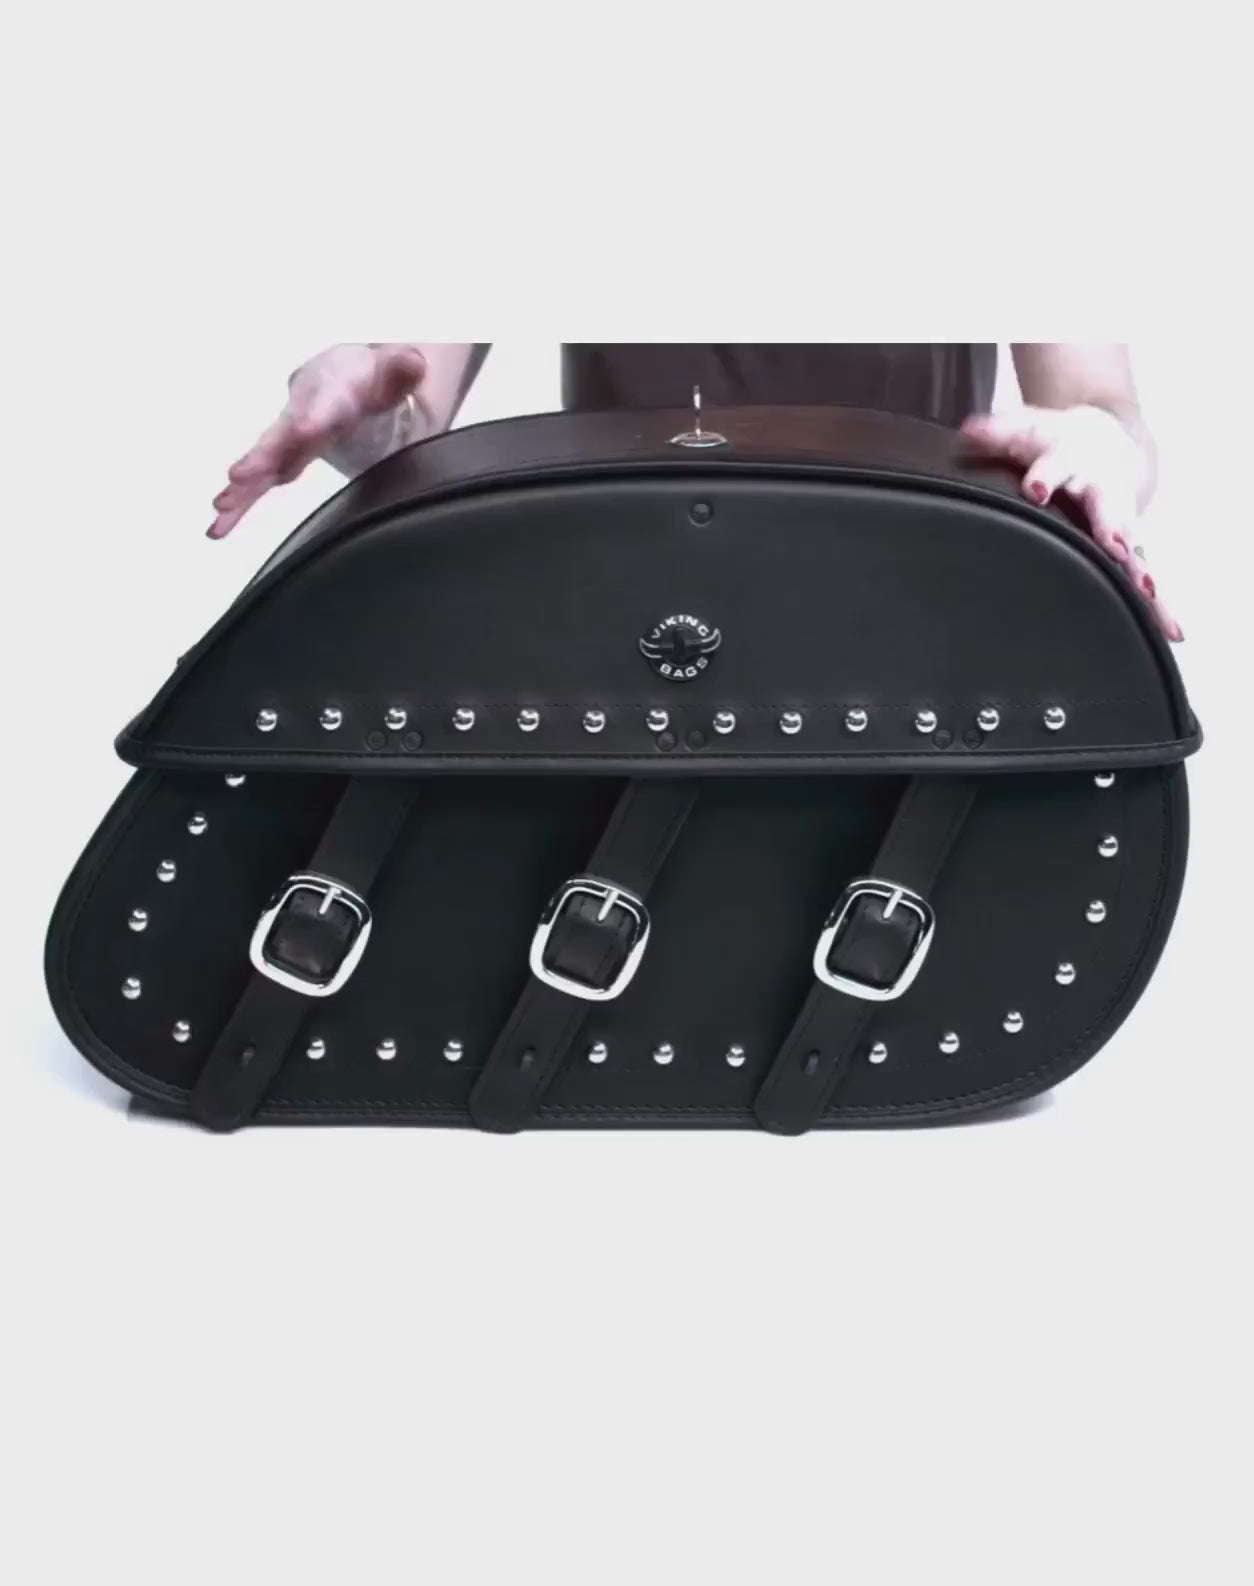 Viking Trianon Extra Large Studded Leather Motorcycle Saddlebags for Harley Softail Cross Bones FLSTSB Video